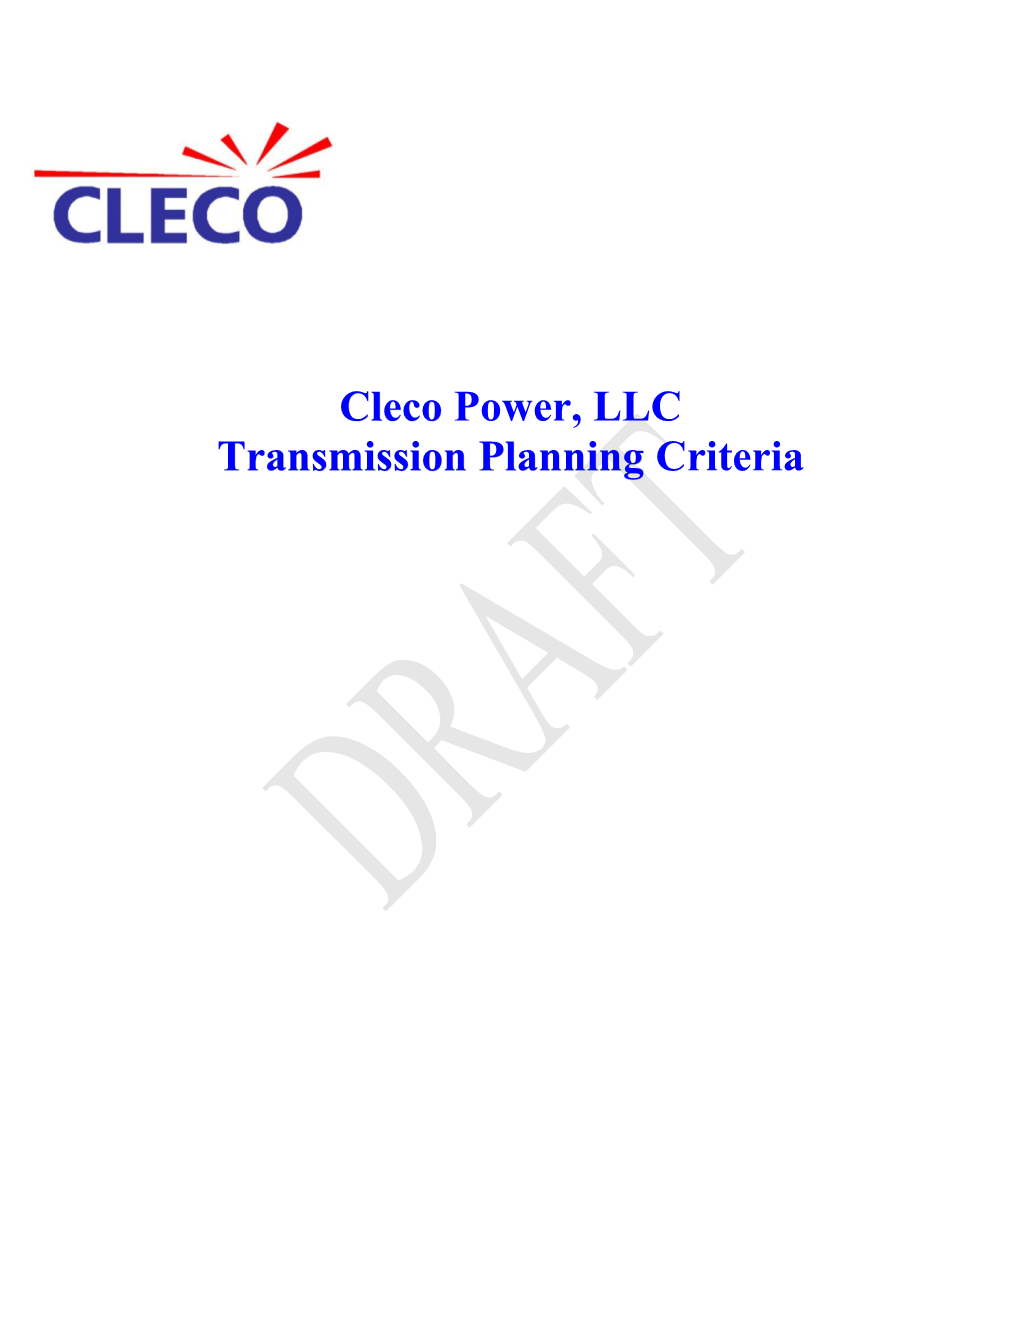 Cleco Transmission Planning Criteria